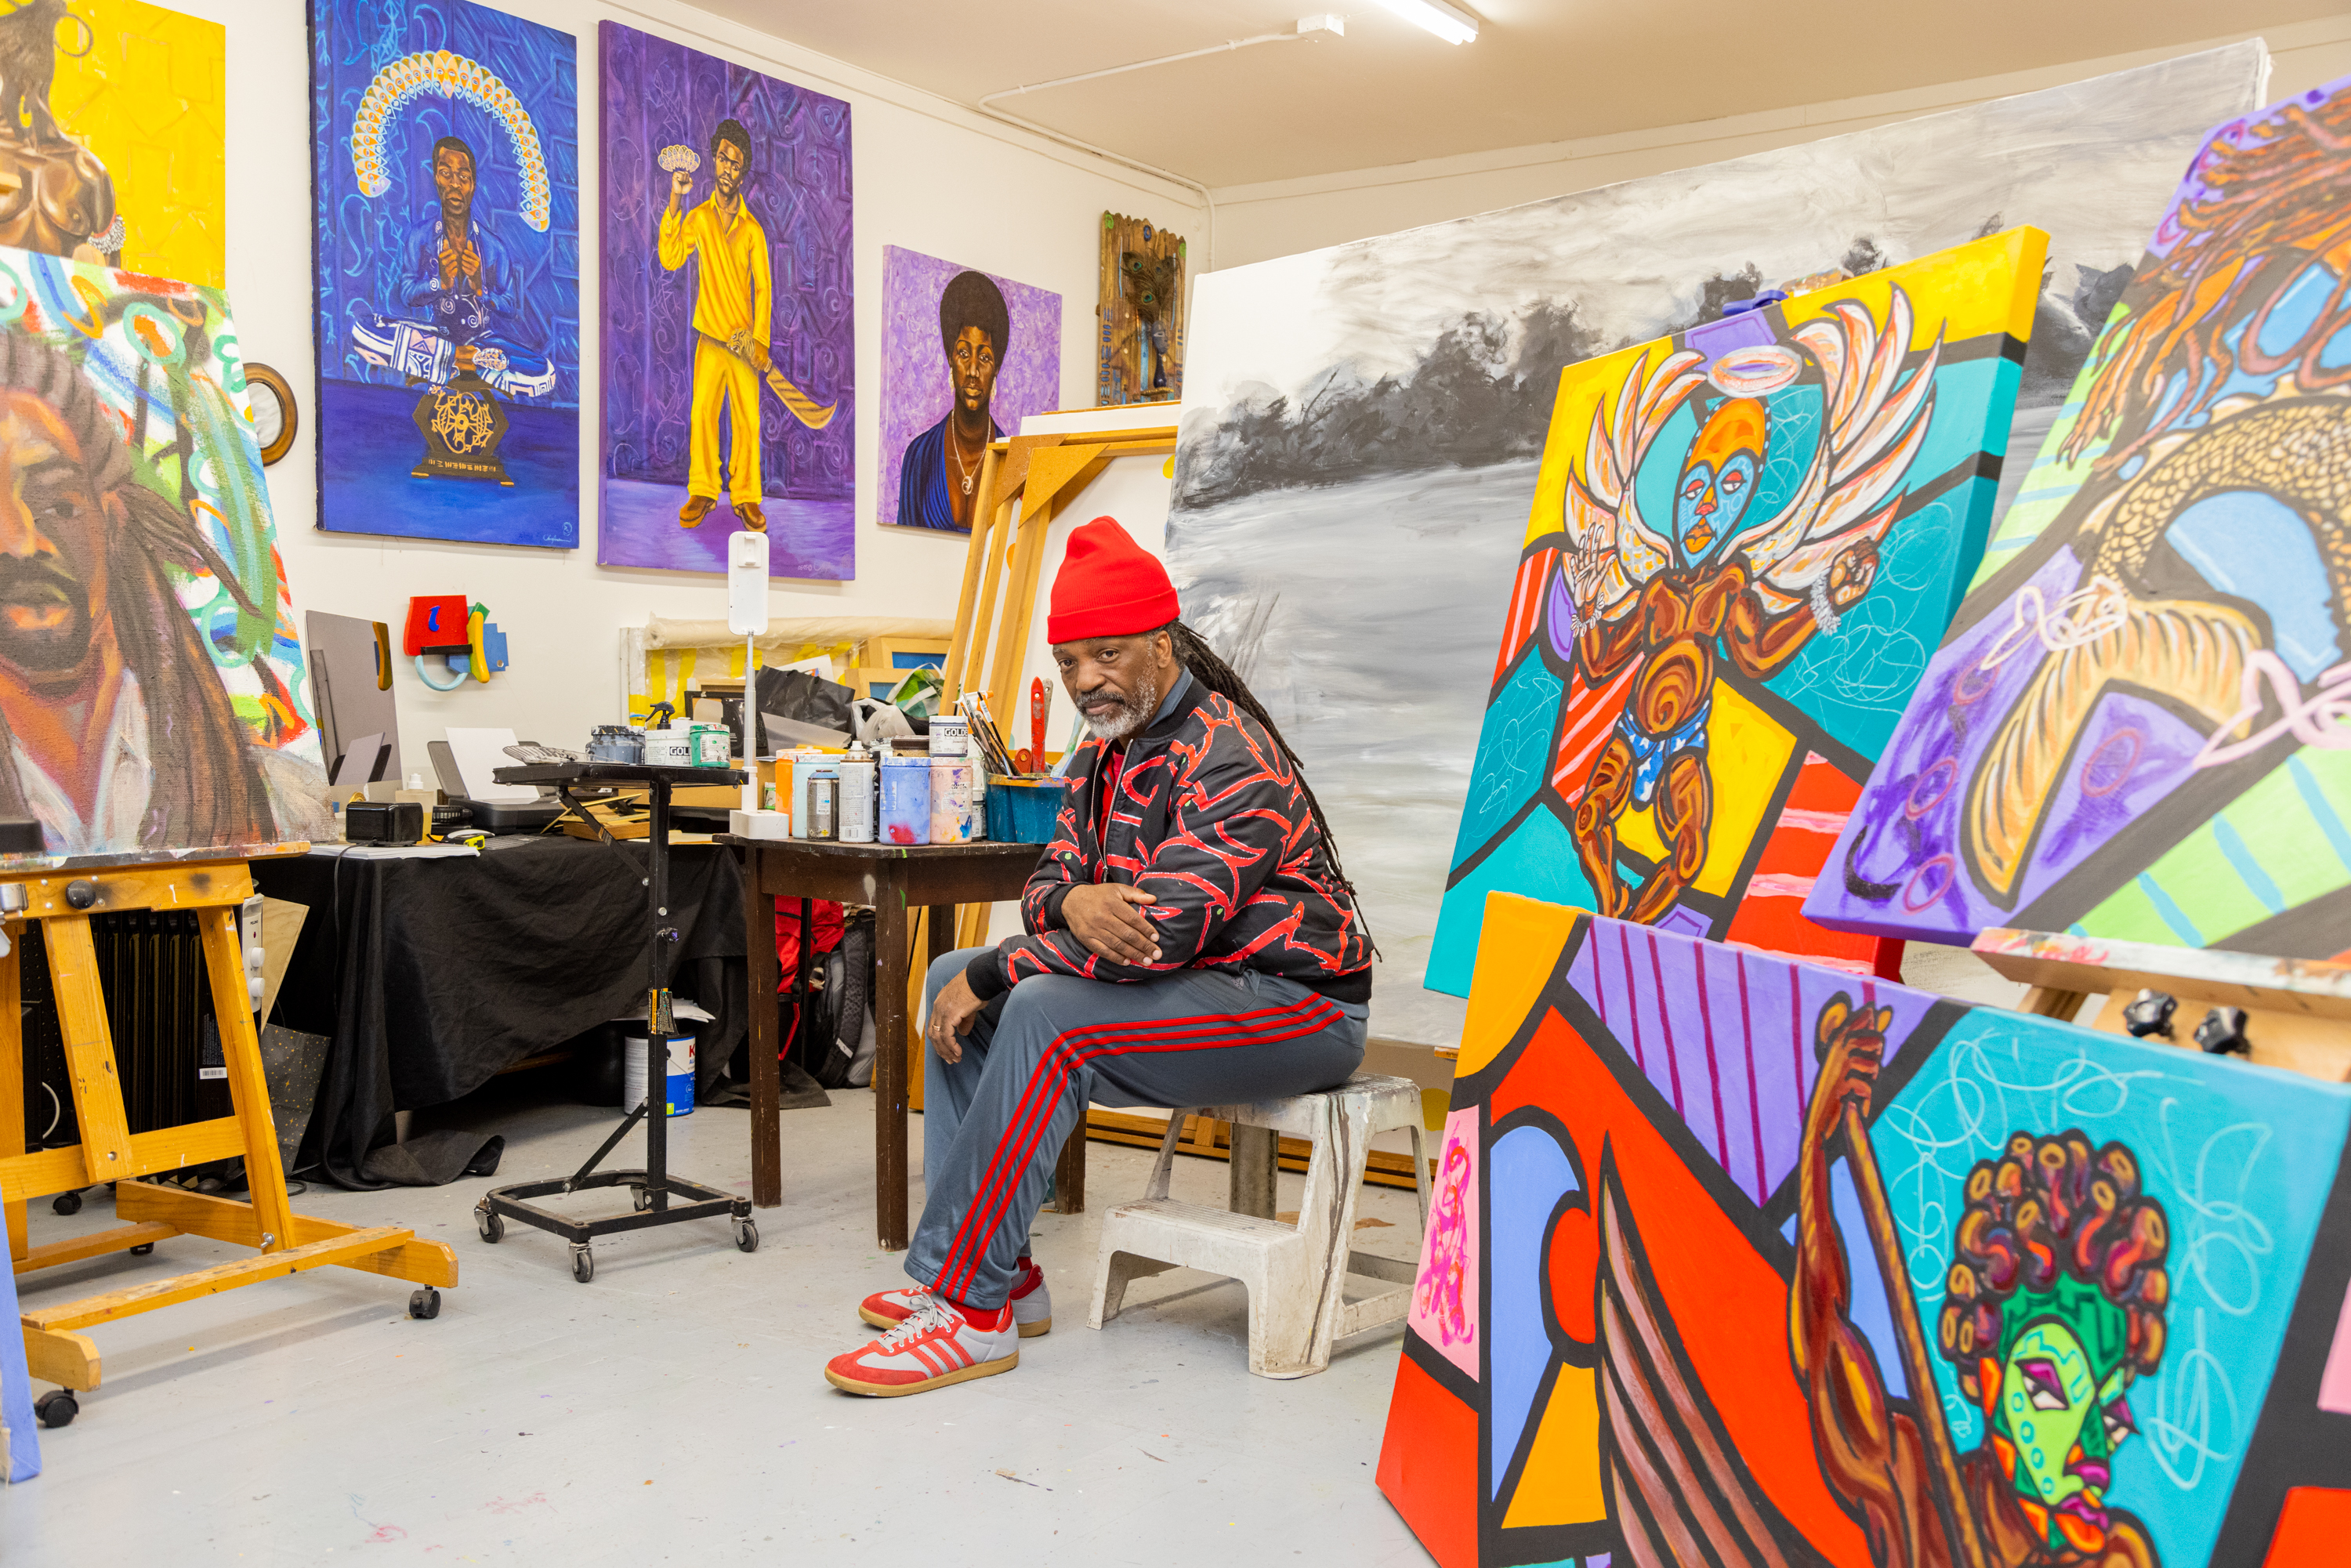 An artist sits in a studio surrounded by colorful, vibrant paintings on the walls and easels.